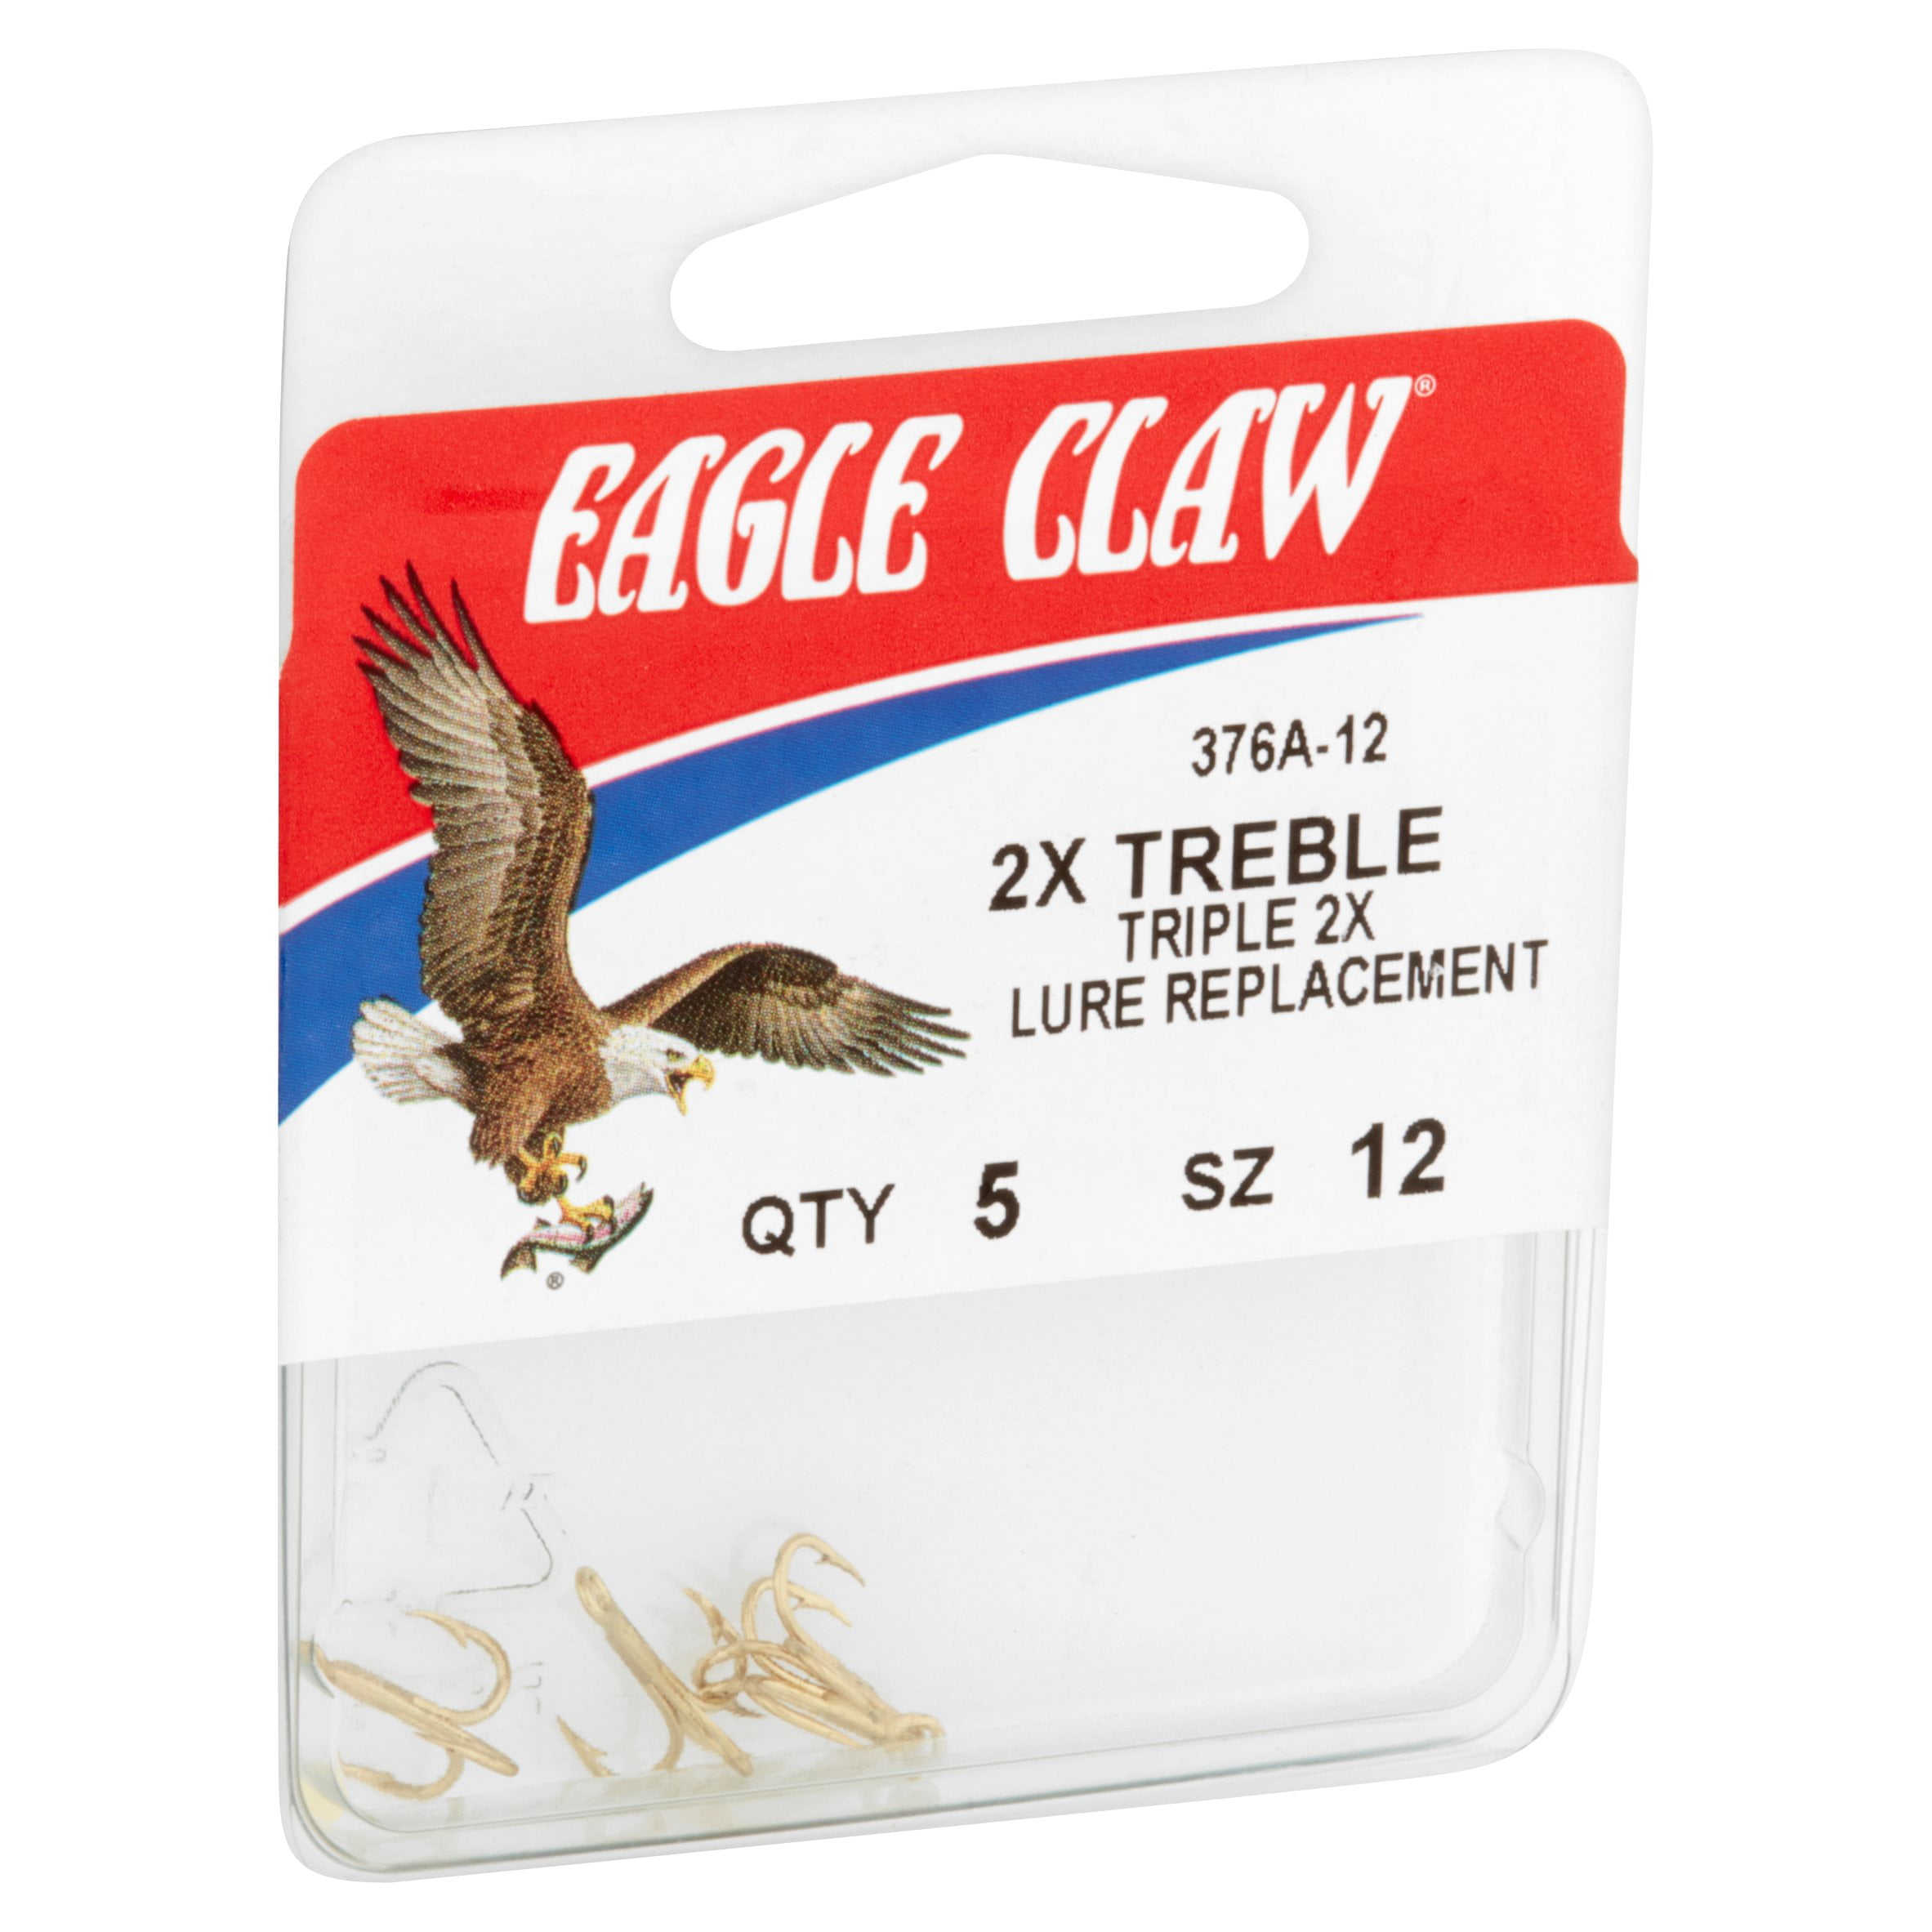 Eagle Claw 376A-12 2X Treble Hook, Gold, Size 12, 5 Pack